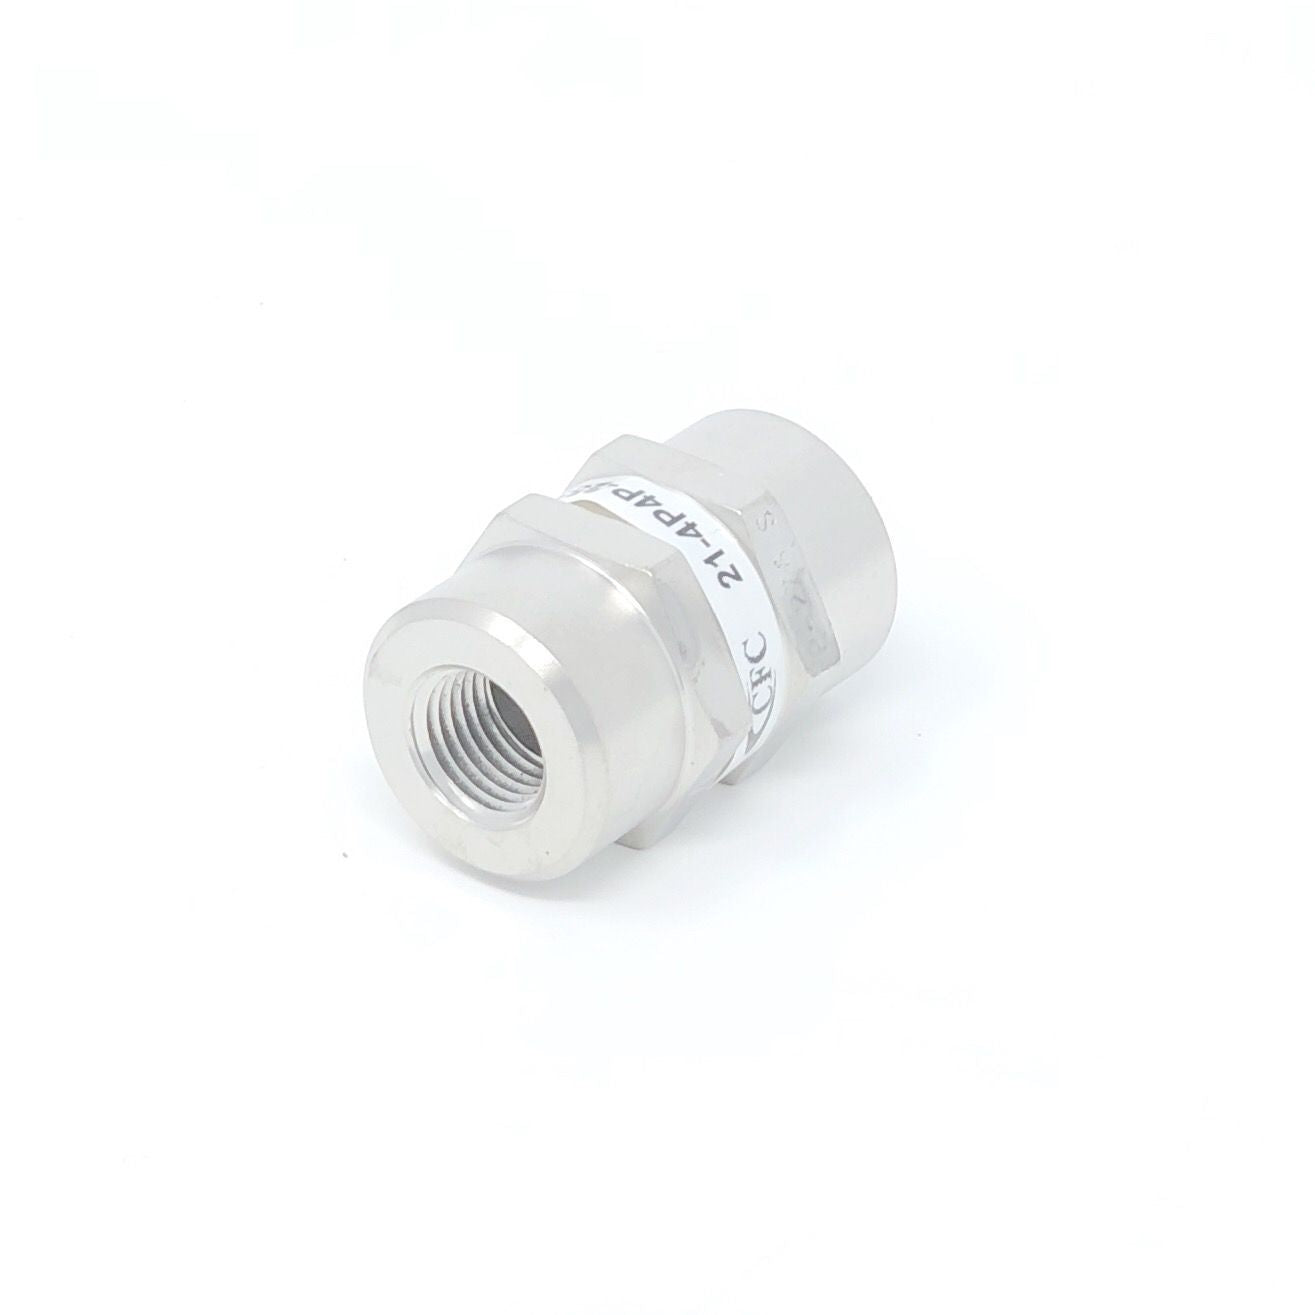 21-12P12P-25S : Chase High Pressure Inline Filter, 3000psi, 3/4" NPT, 25 Micron, No Visual Indicator, No Bypass